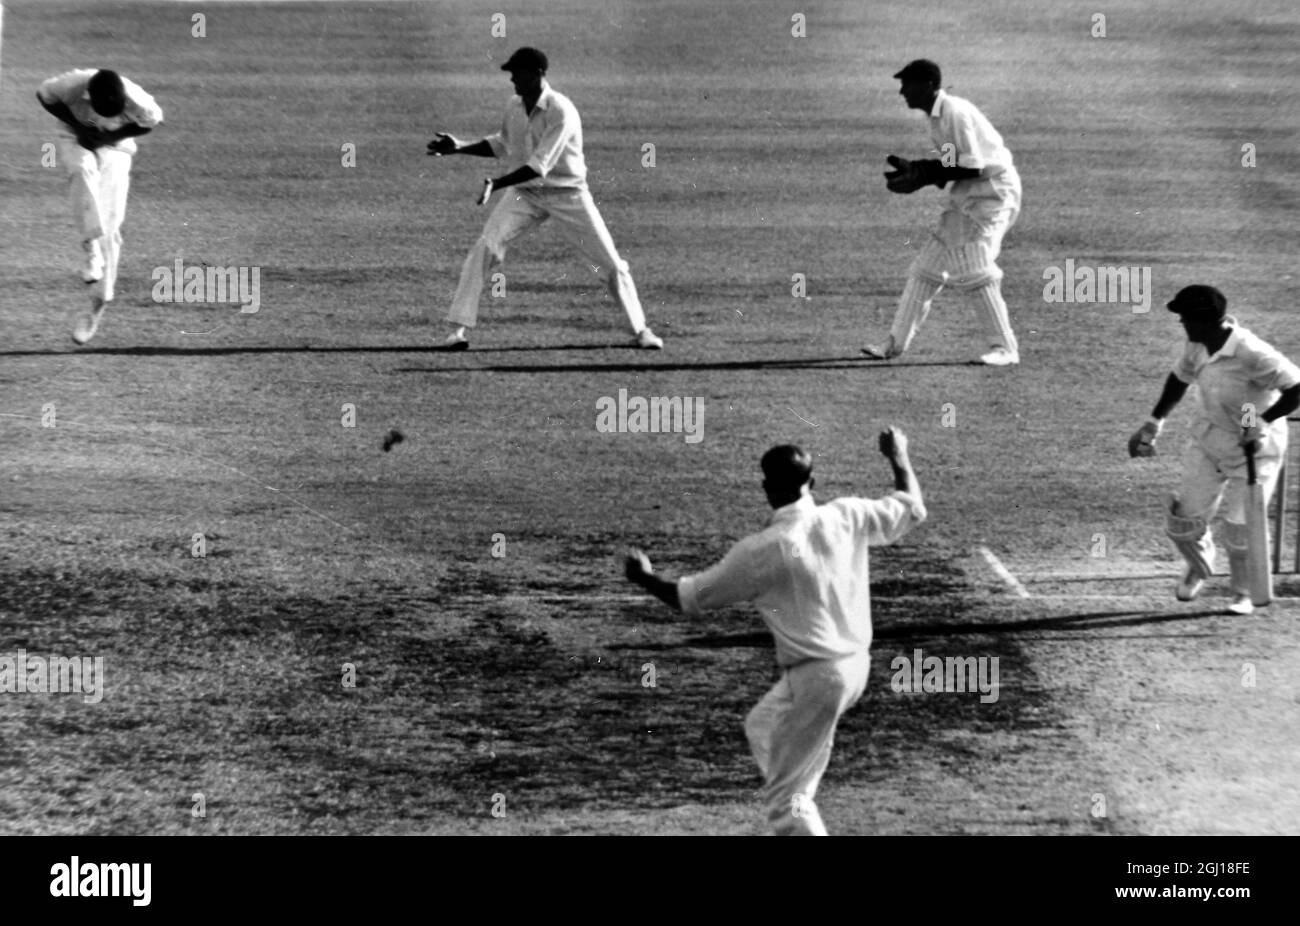 CRICKET SOUTH AFRICA V AUSTRALIA BARLOW EJ CATCHES OUT O NEILL IN ACTION ; 6 DECEMBER 1963 Stock Photo